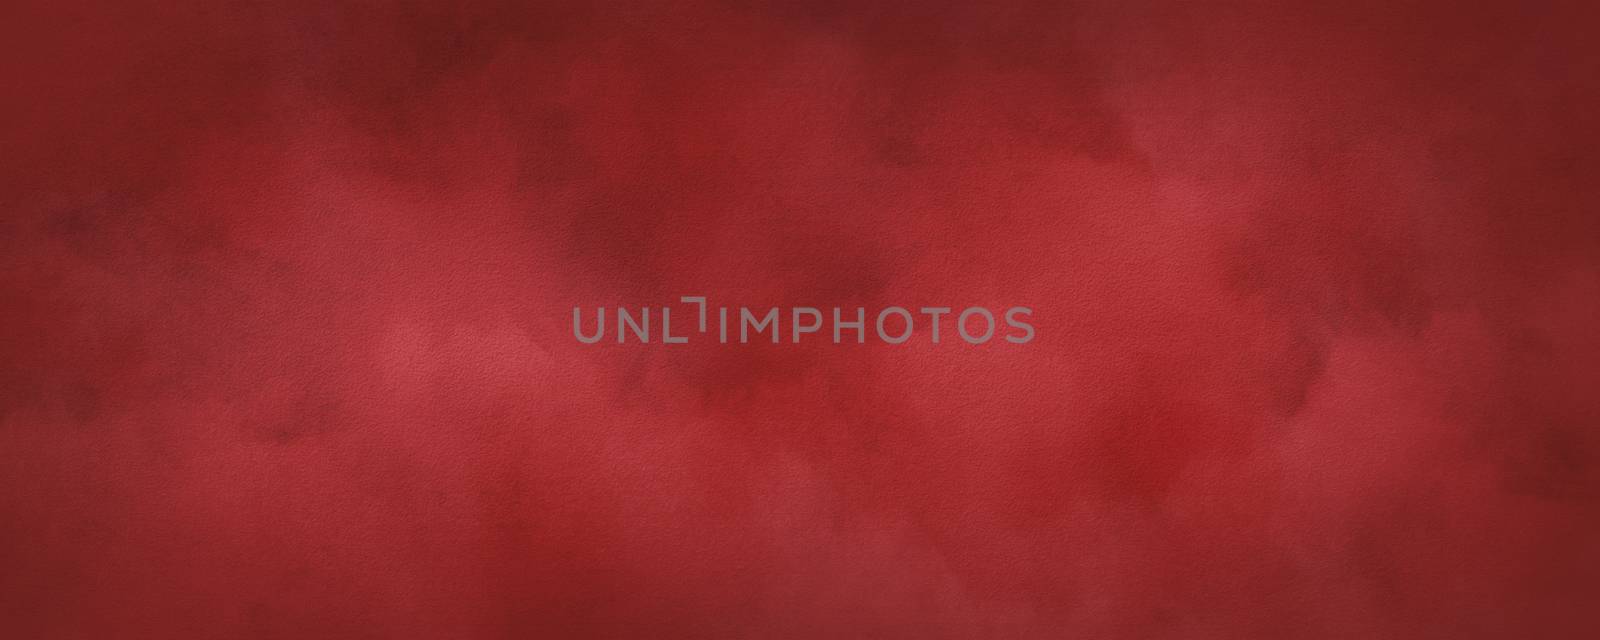 Abstract red paper Background texture, Dark color, Chalkboard. C by anlomaja